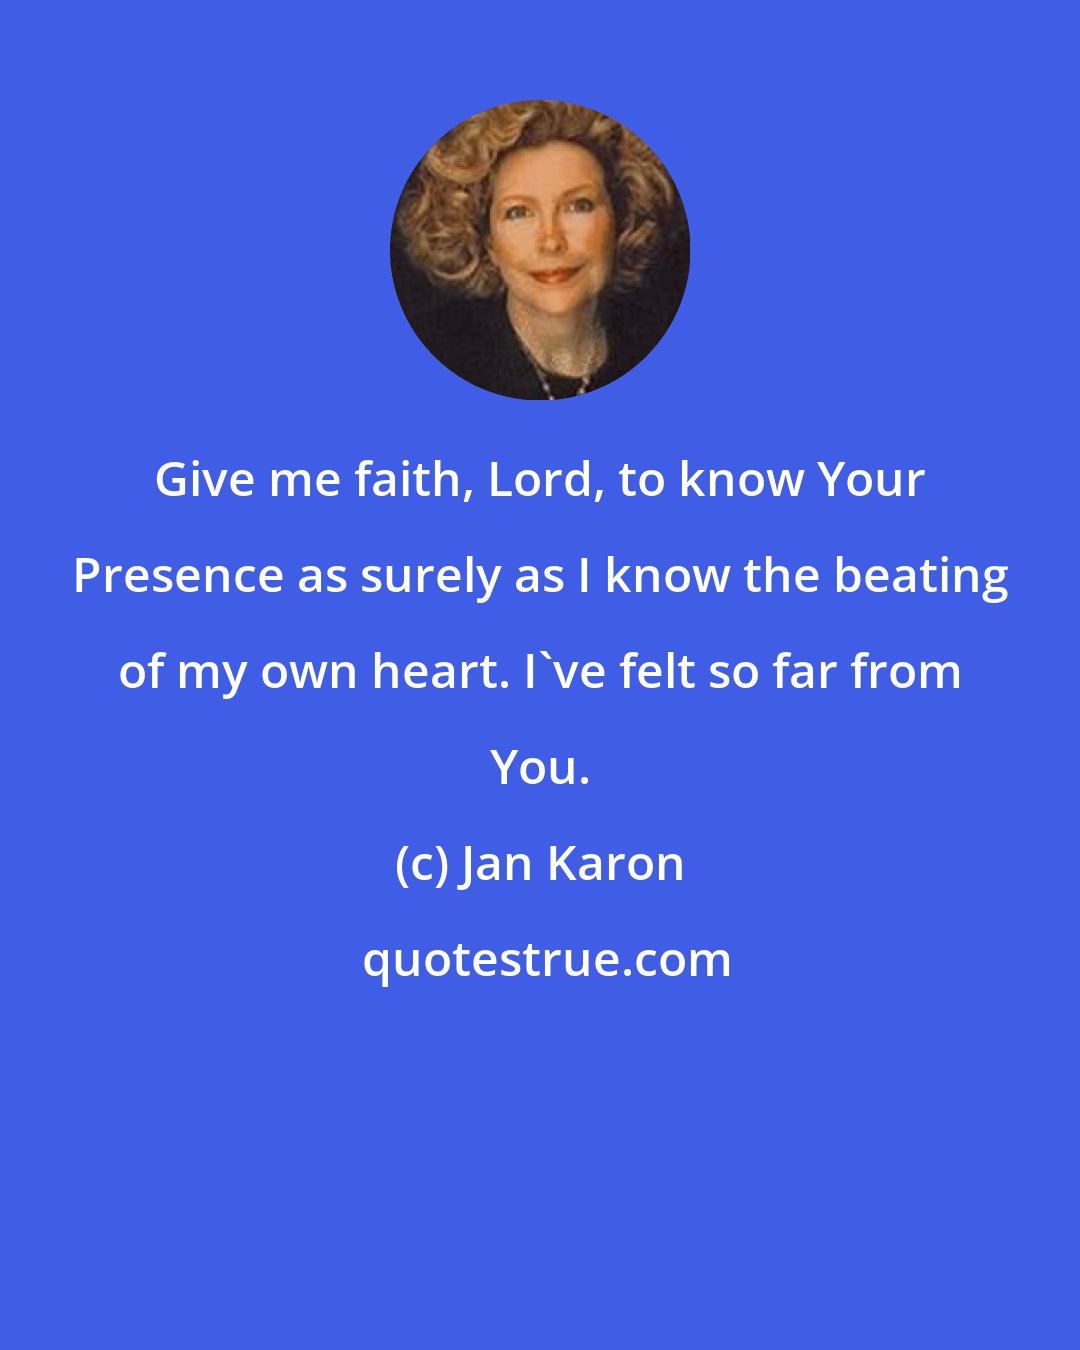 Jan Karon: Give me faith, Lord, to know Your Presence as surely as I know the beating of my own heart. I've felt so far from You.